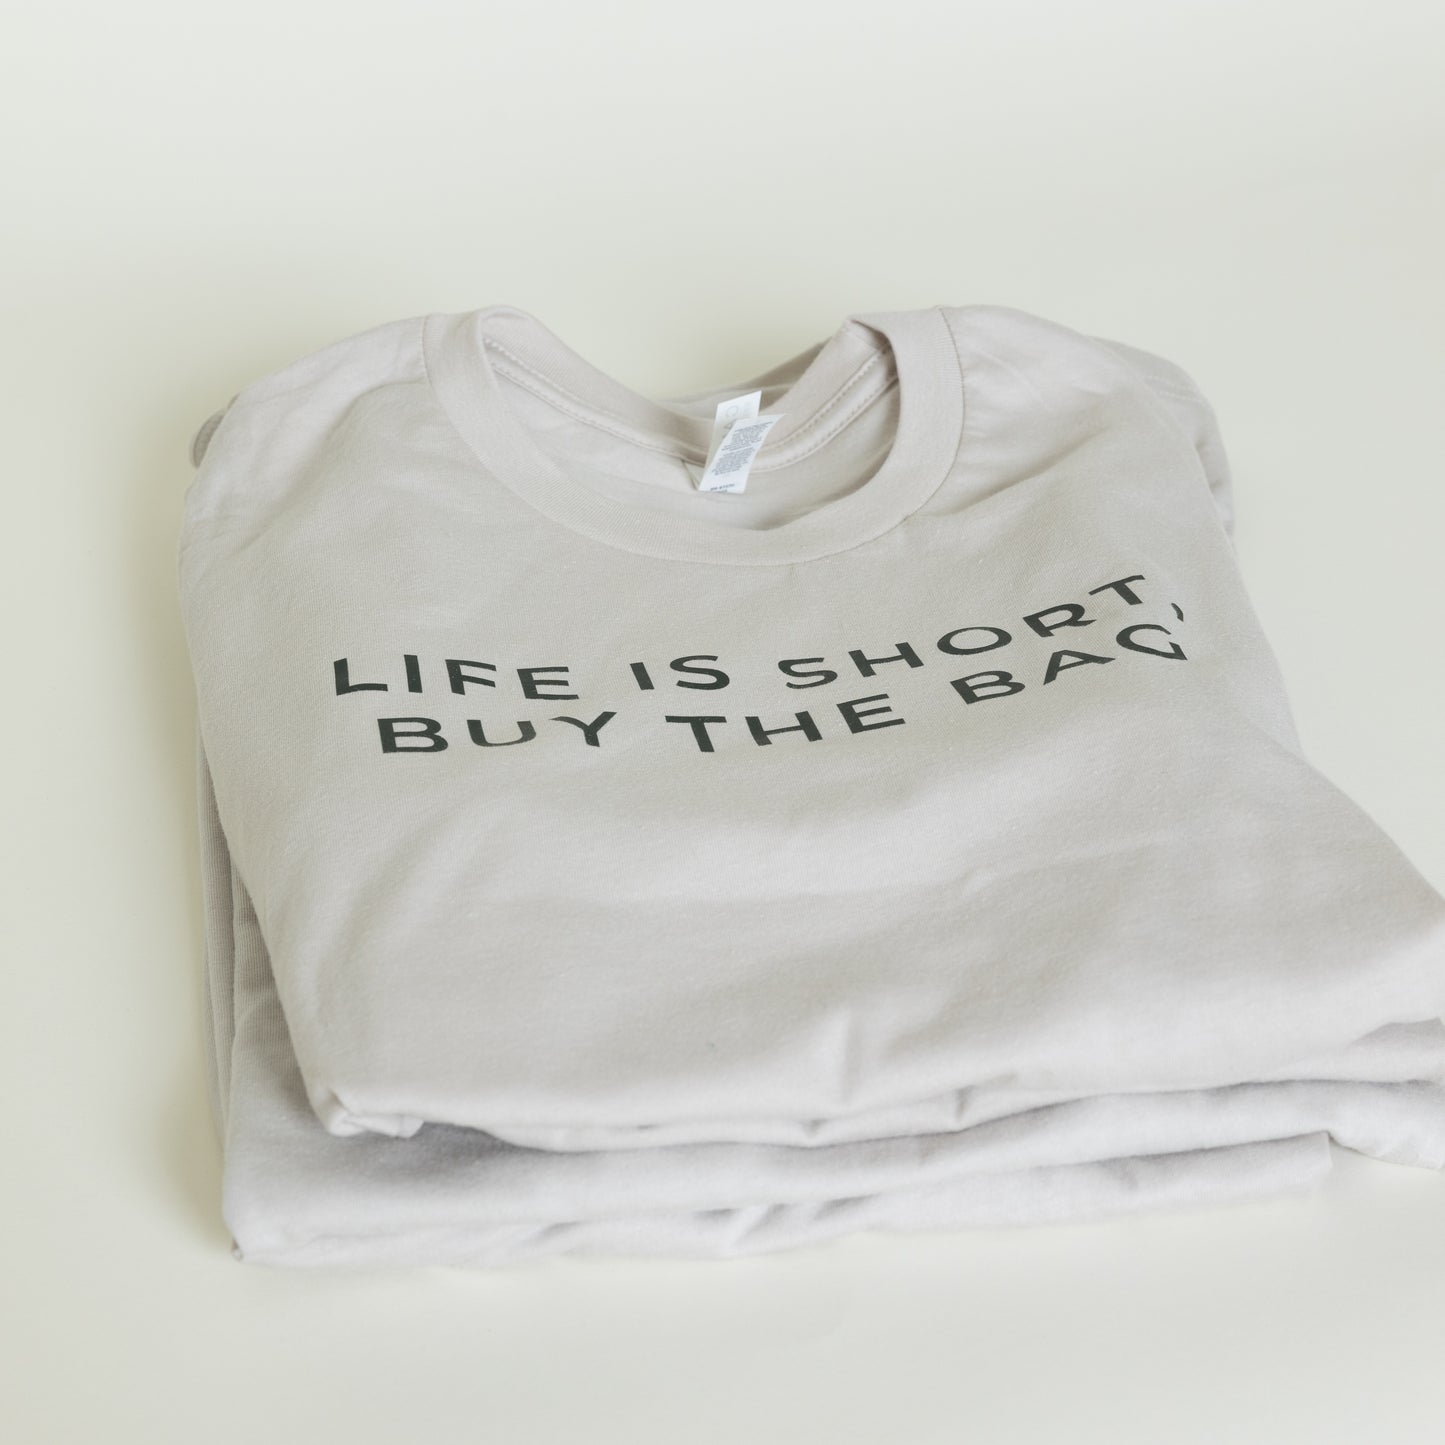 Life is Short, But the Bag T-Shirt